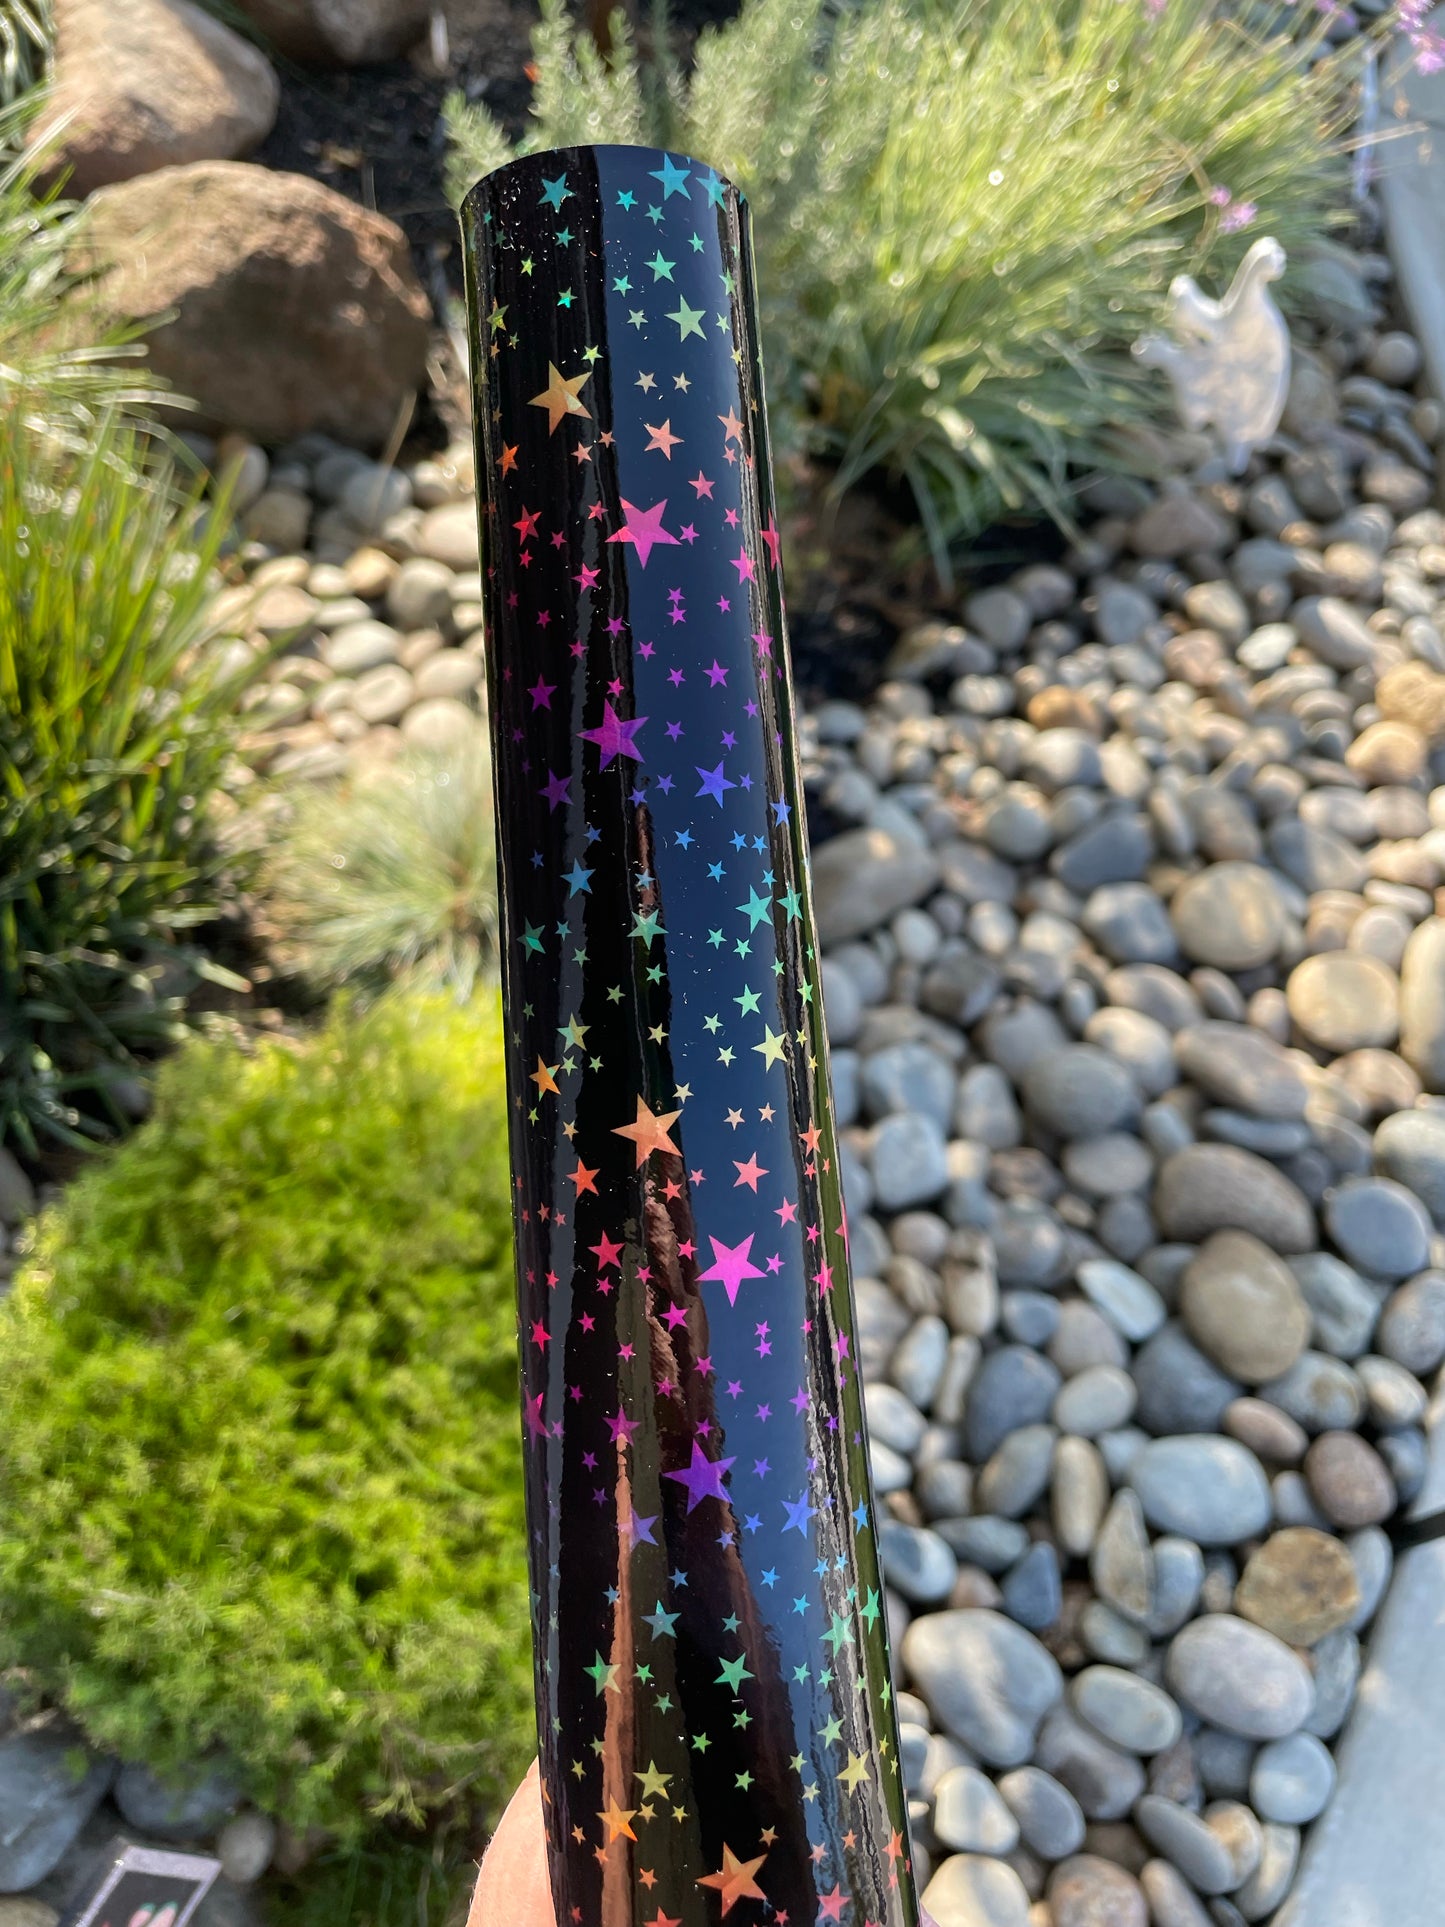 Bright Rainbow Holographic Star Patent Vinyl (faux leather)